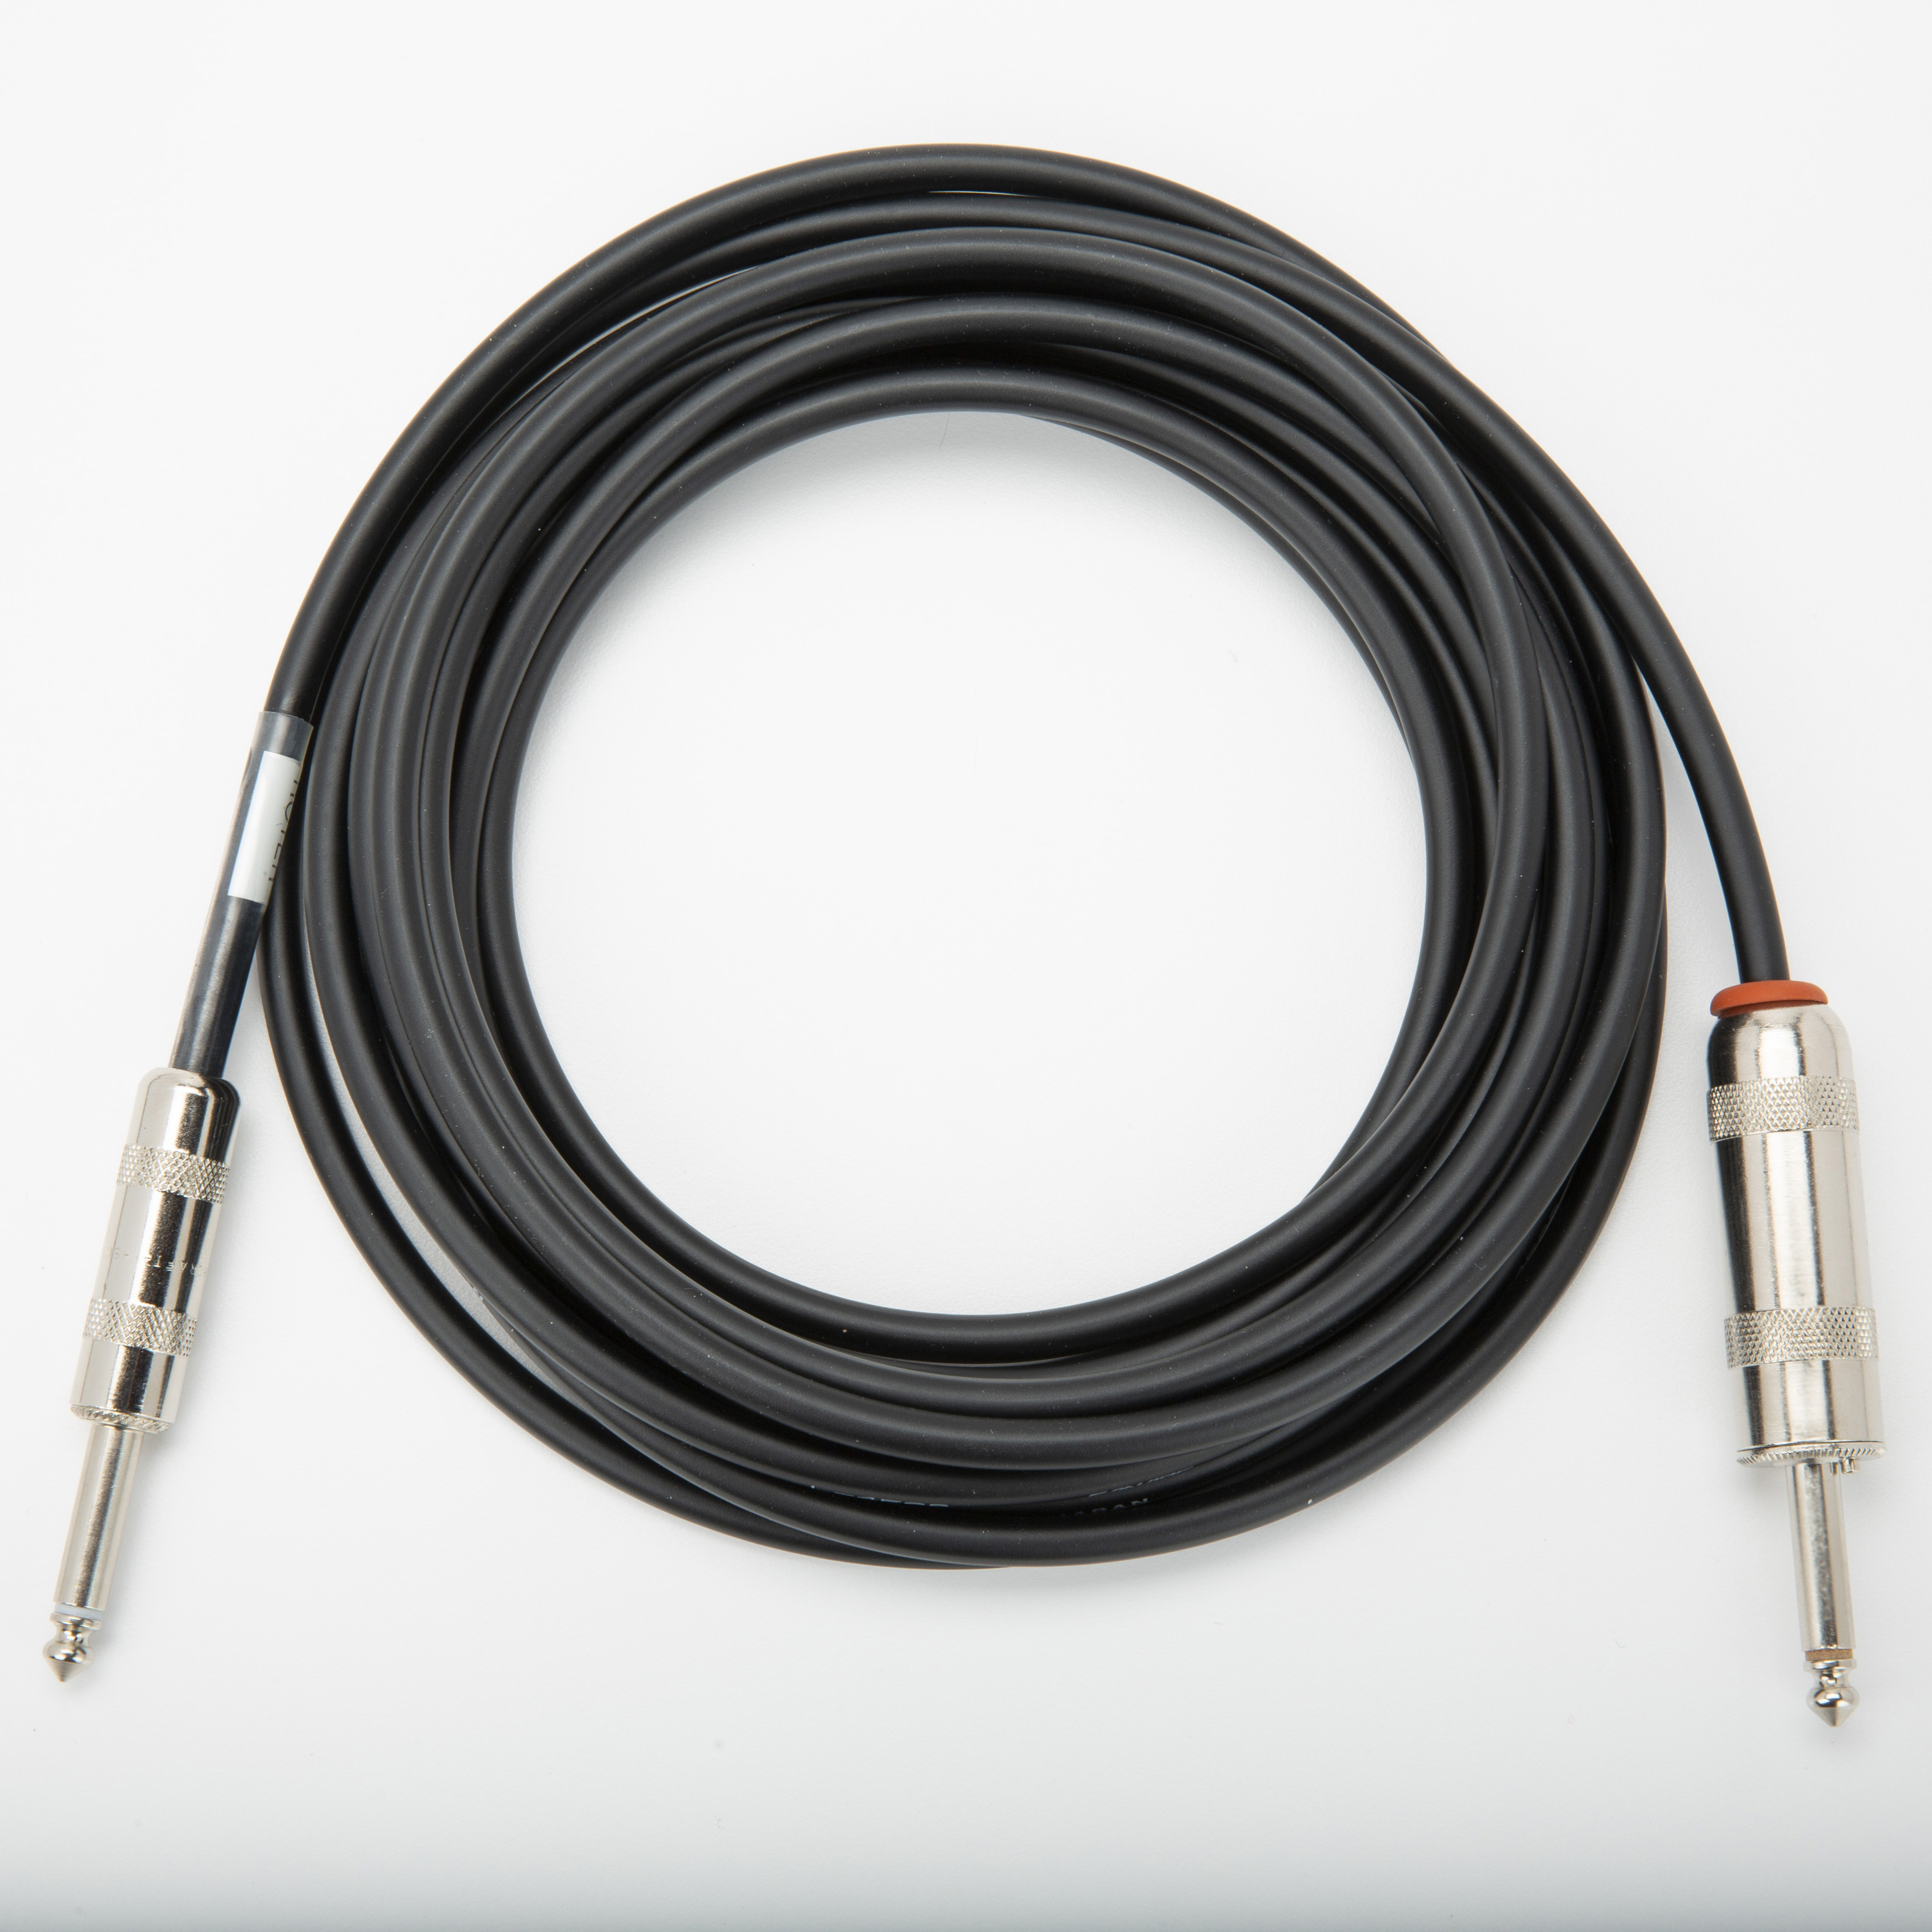 Handcrafted Performance-Grade Auto-Silencing Guitar Cables - Royer Labs